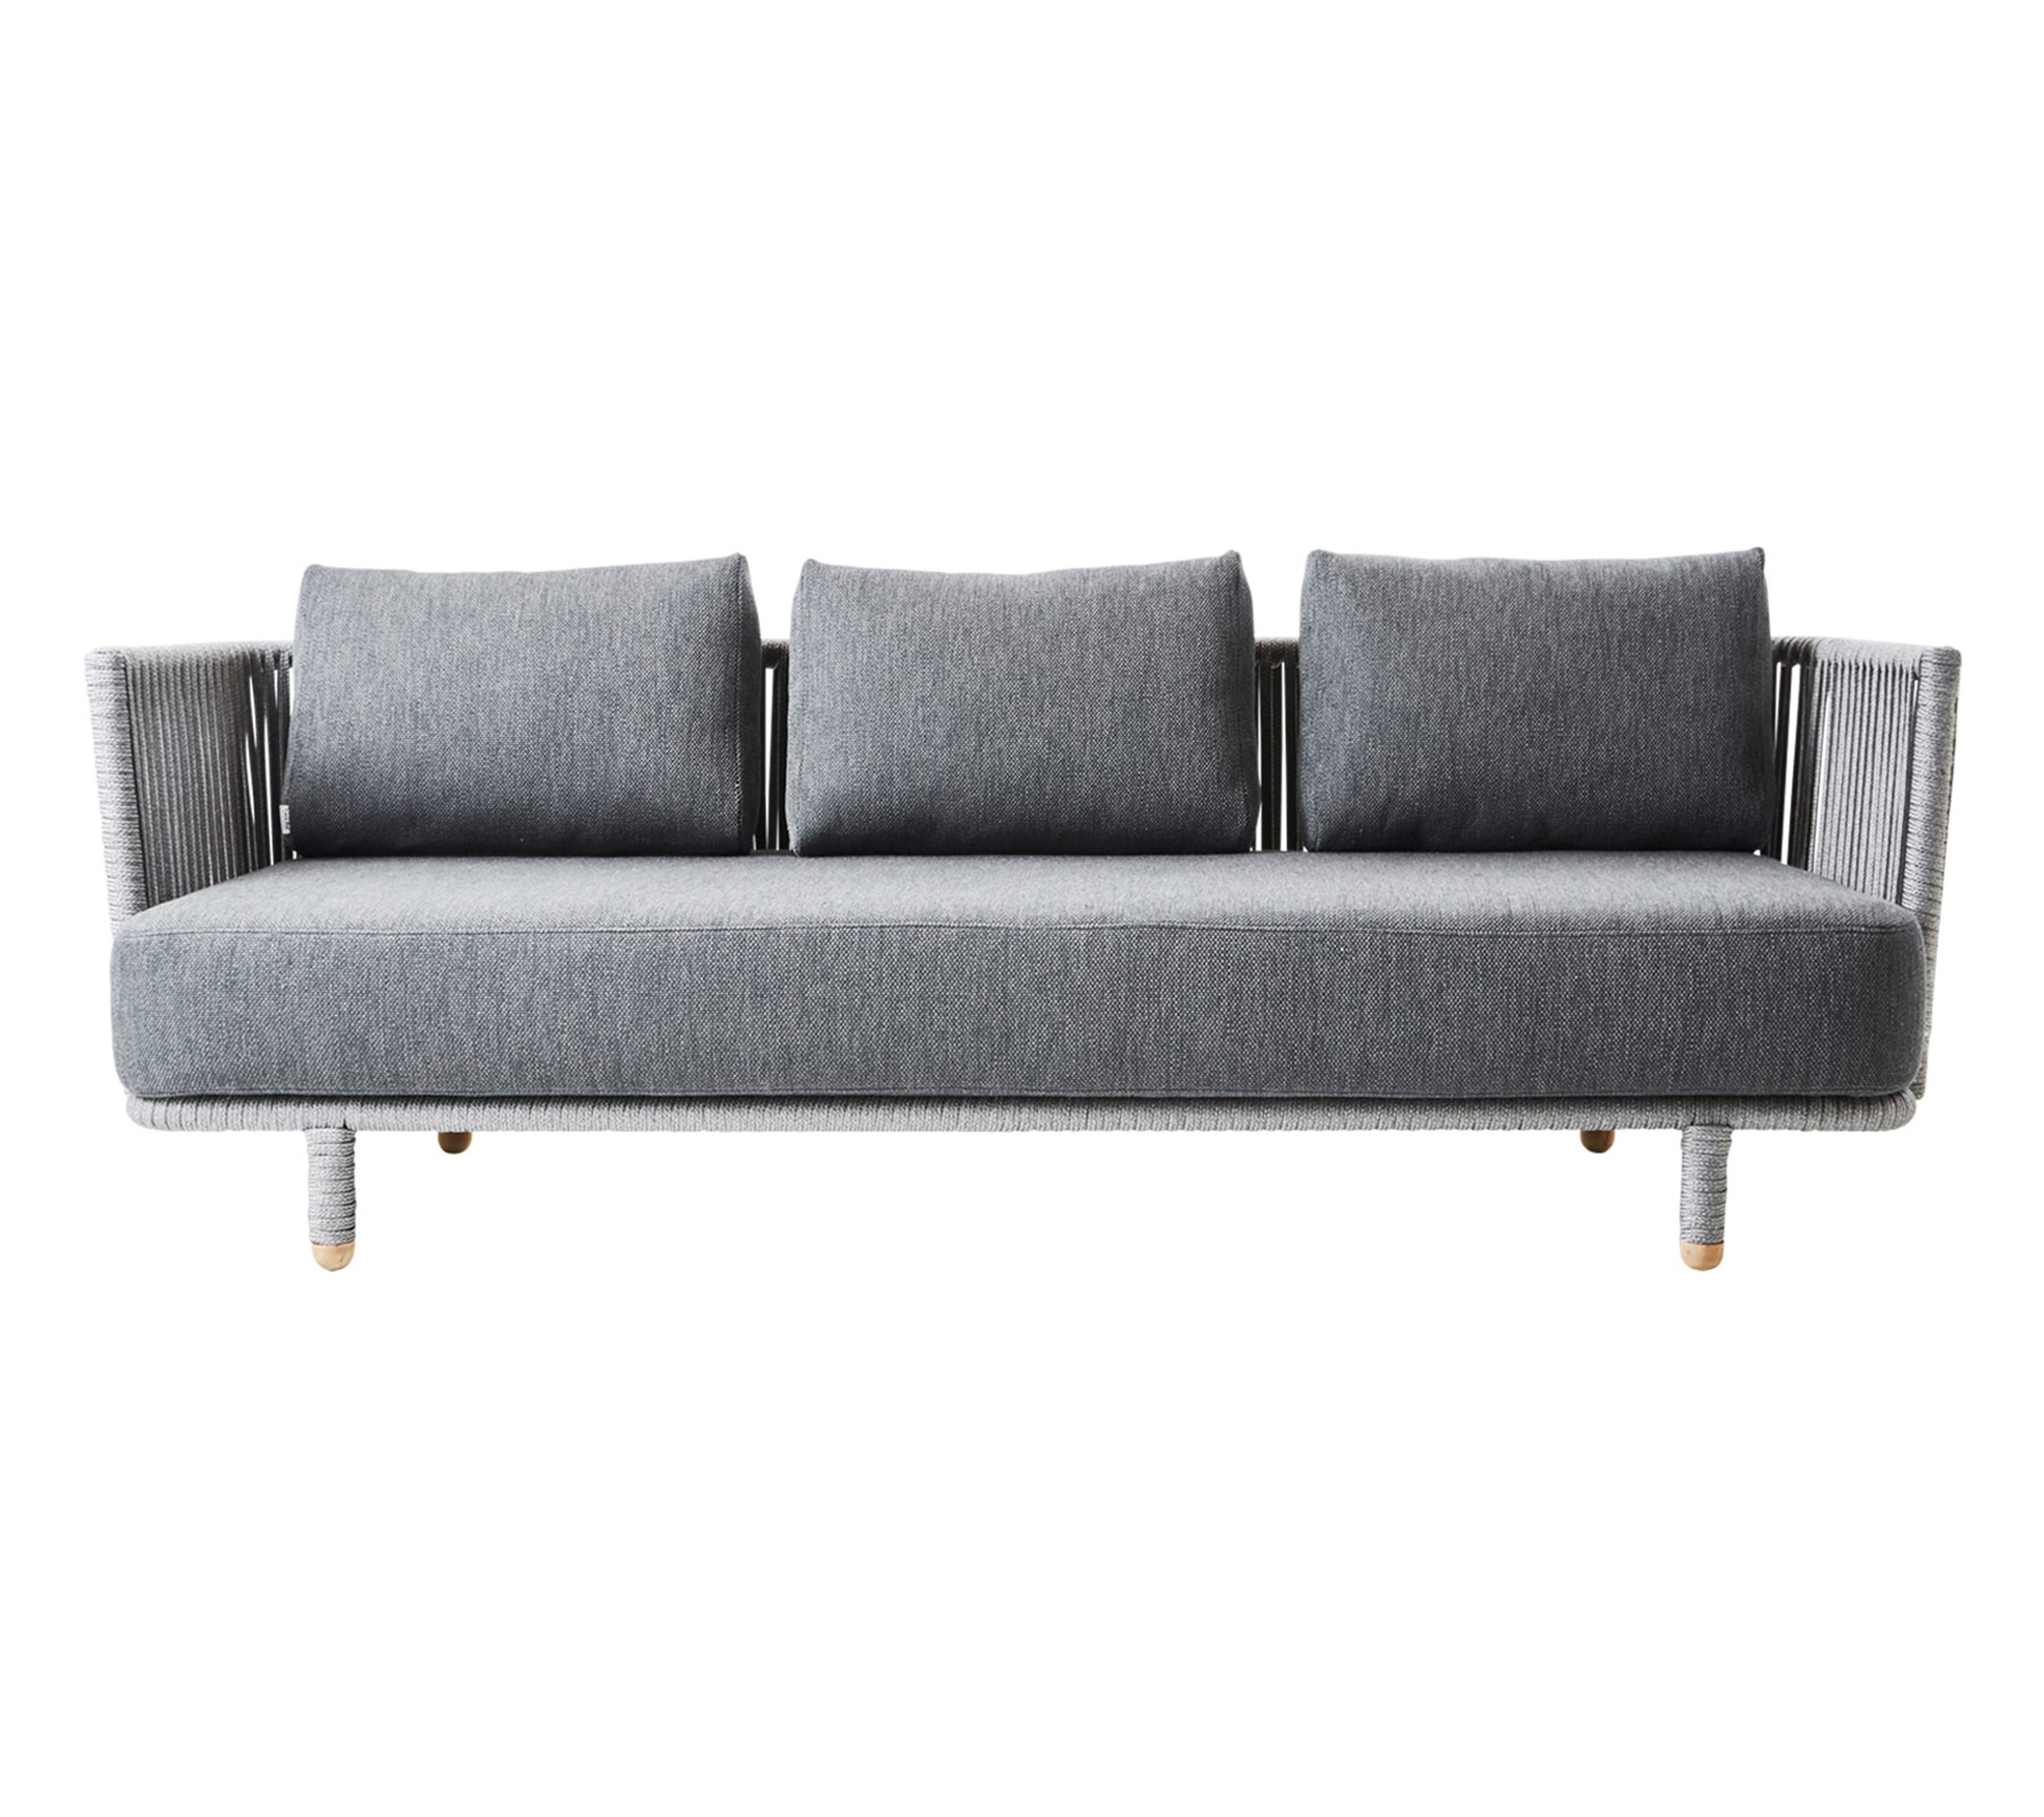 Picture of Moments 3-seater sofa, incl. Grey cushion set